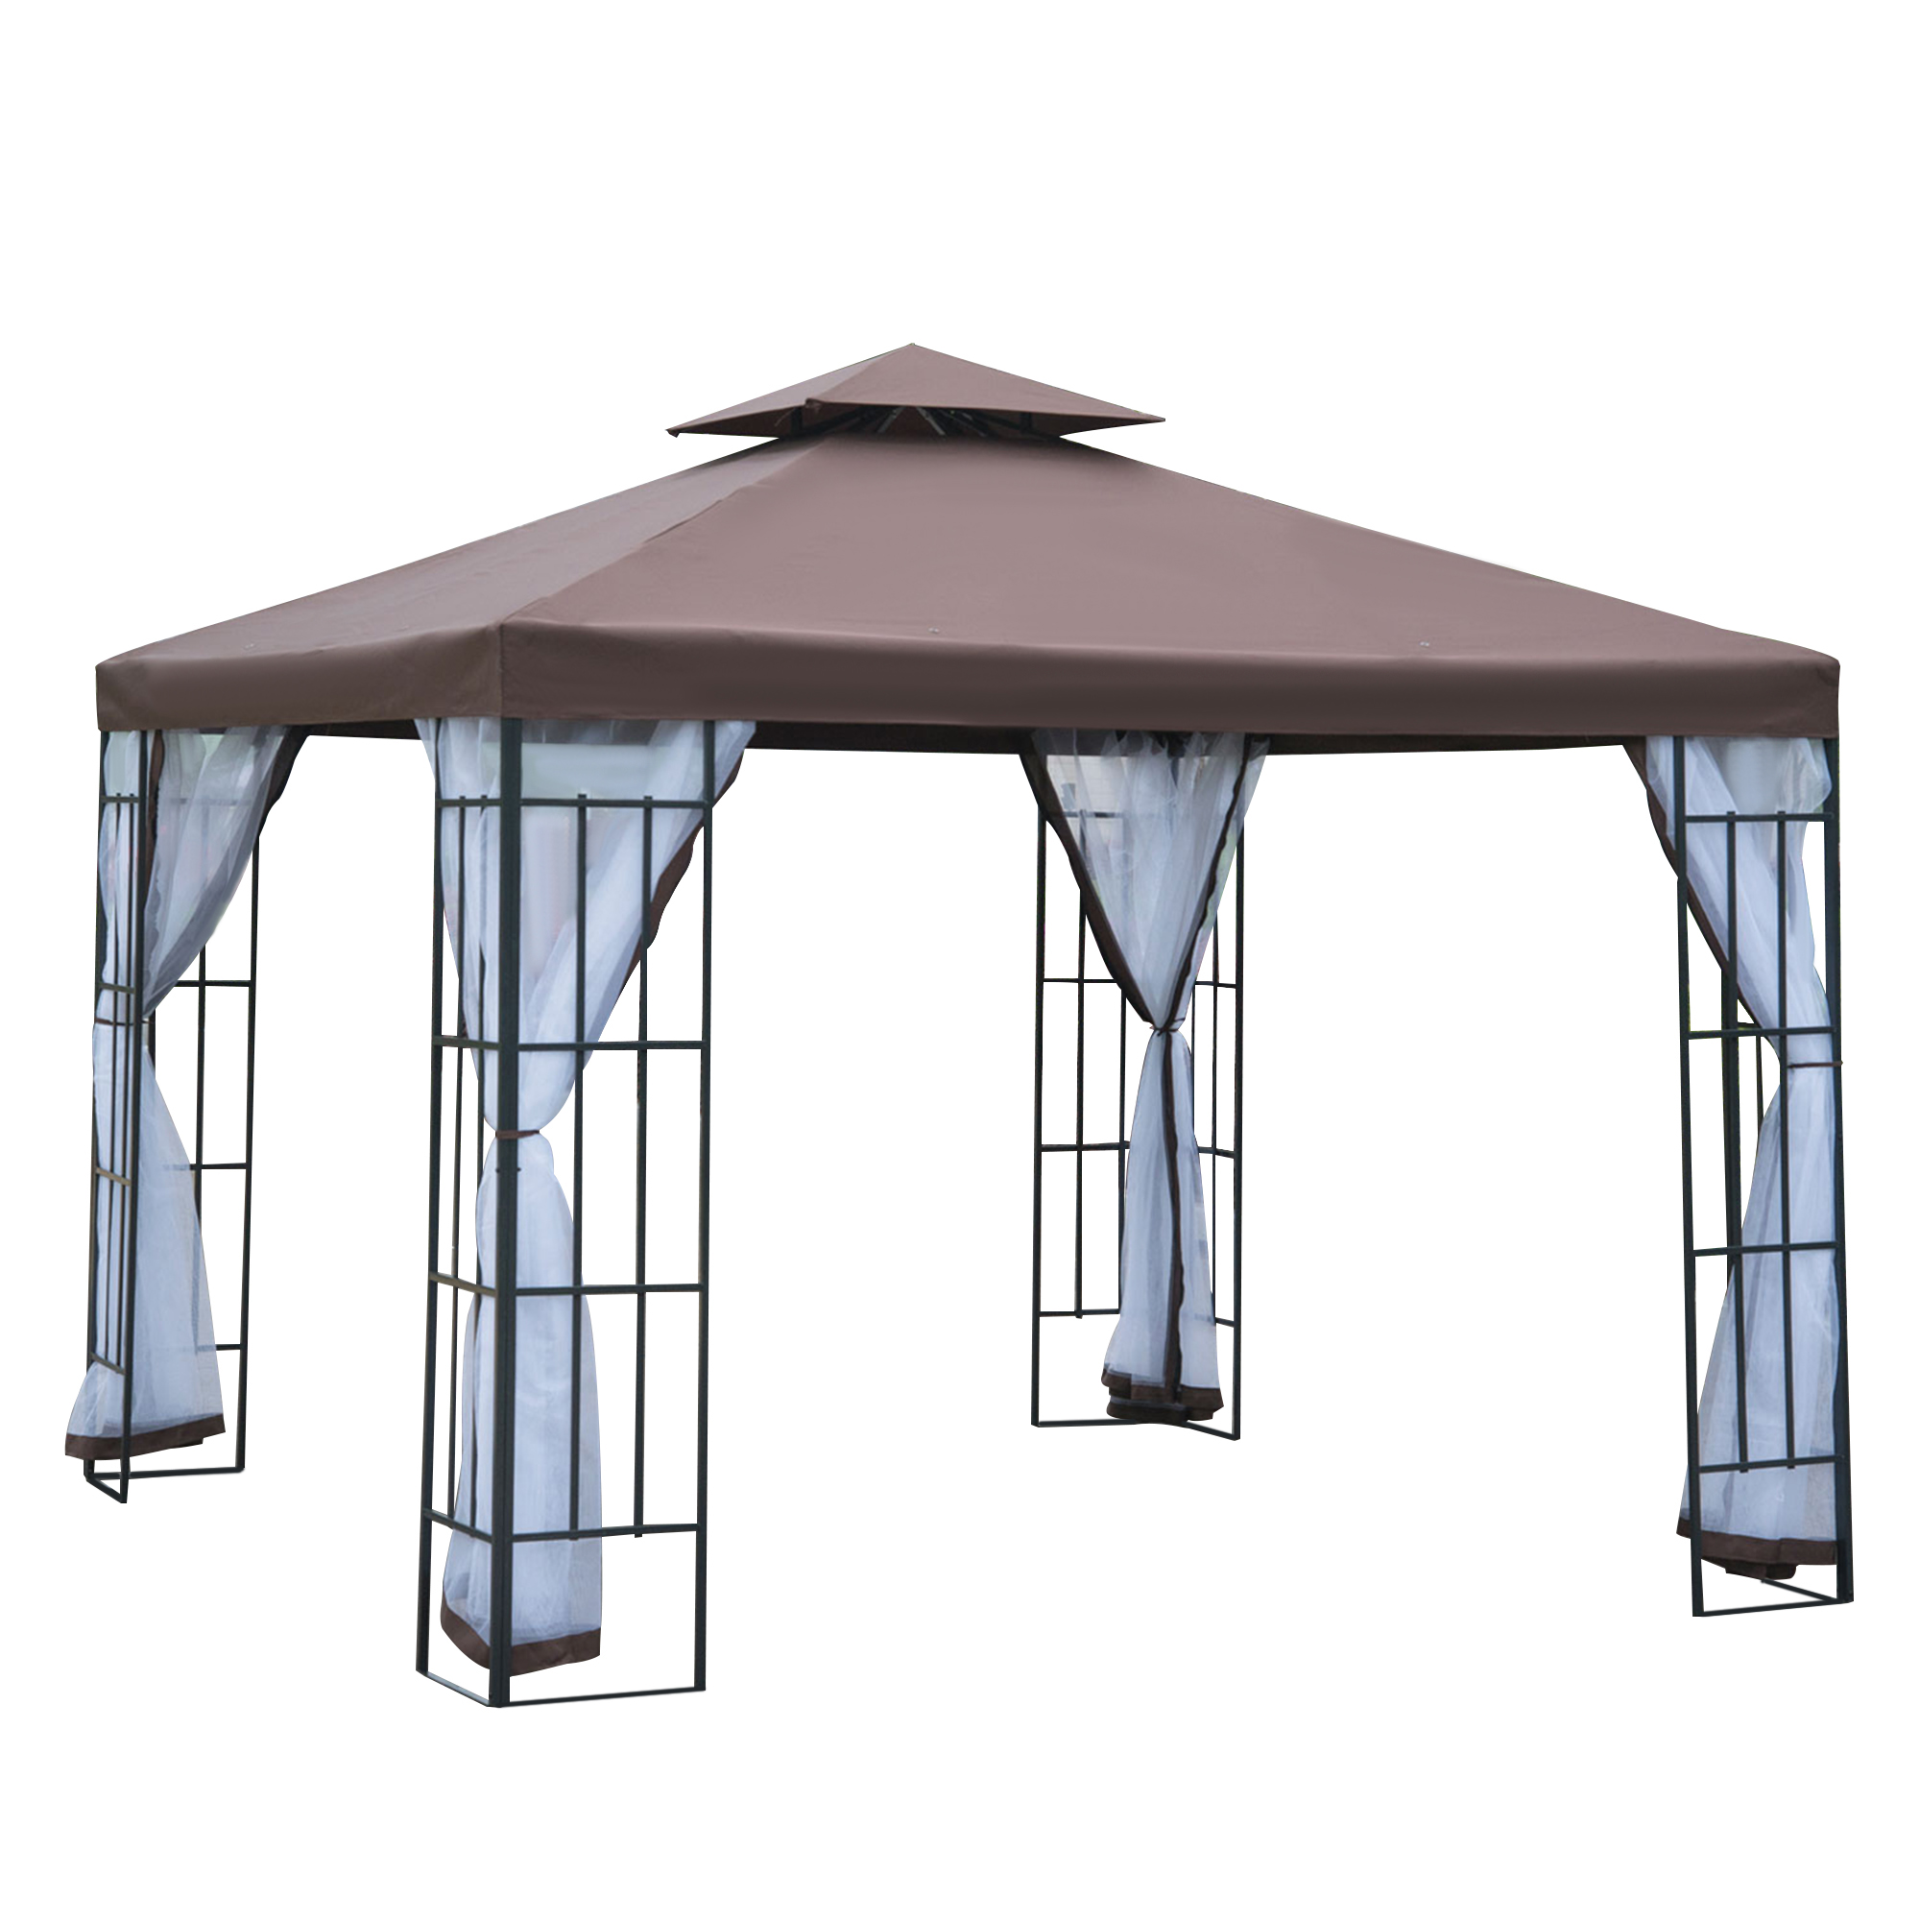 Outsunny 3 x 3(m) Patio Gazebo Canopy Garden Pavilion Tent Shelter with 2 Tier R